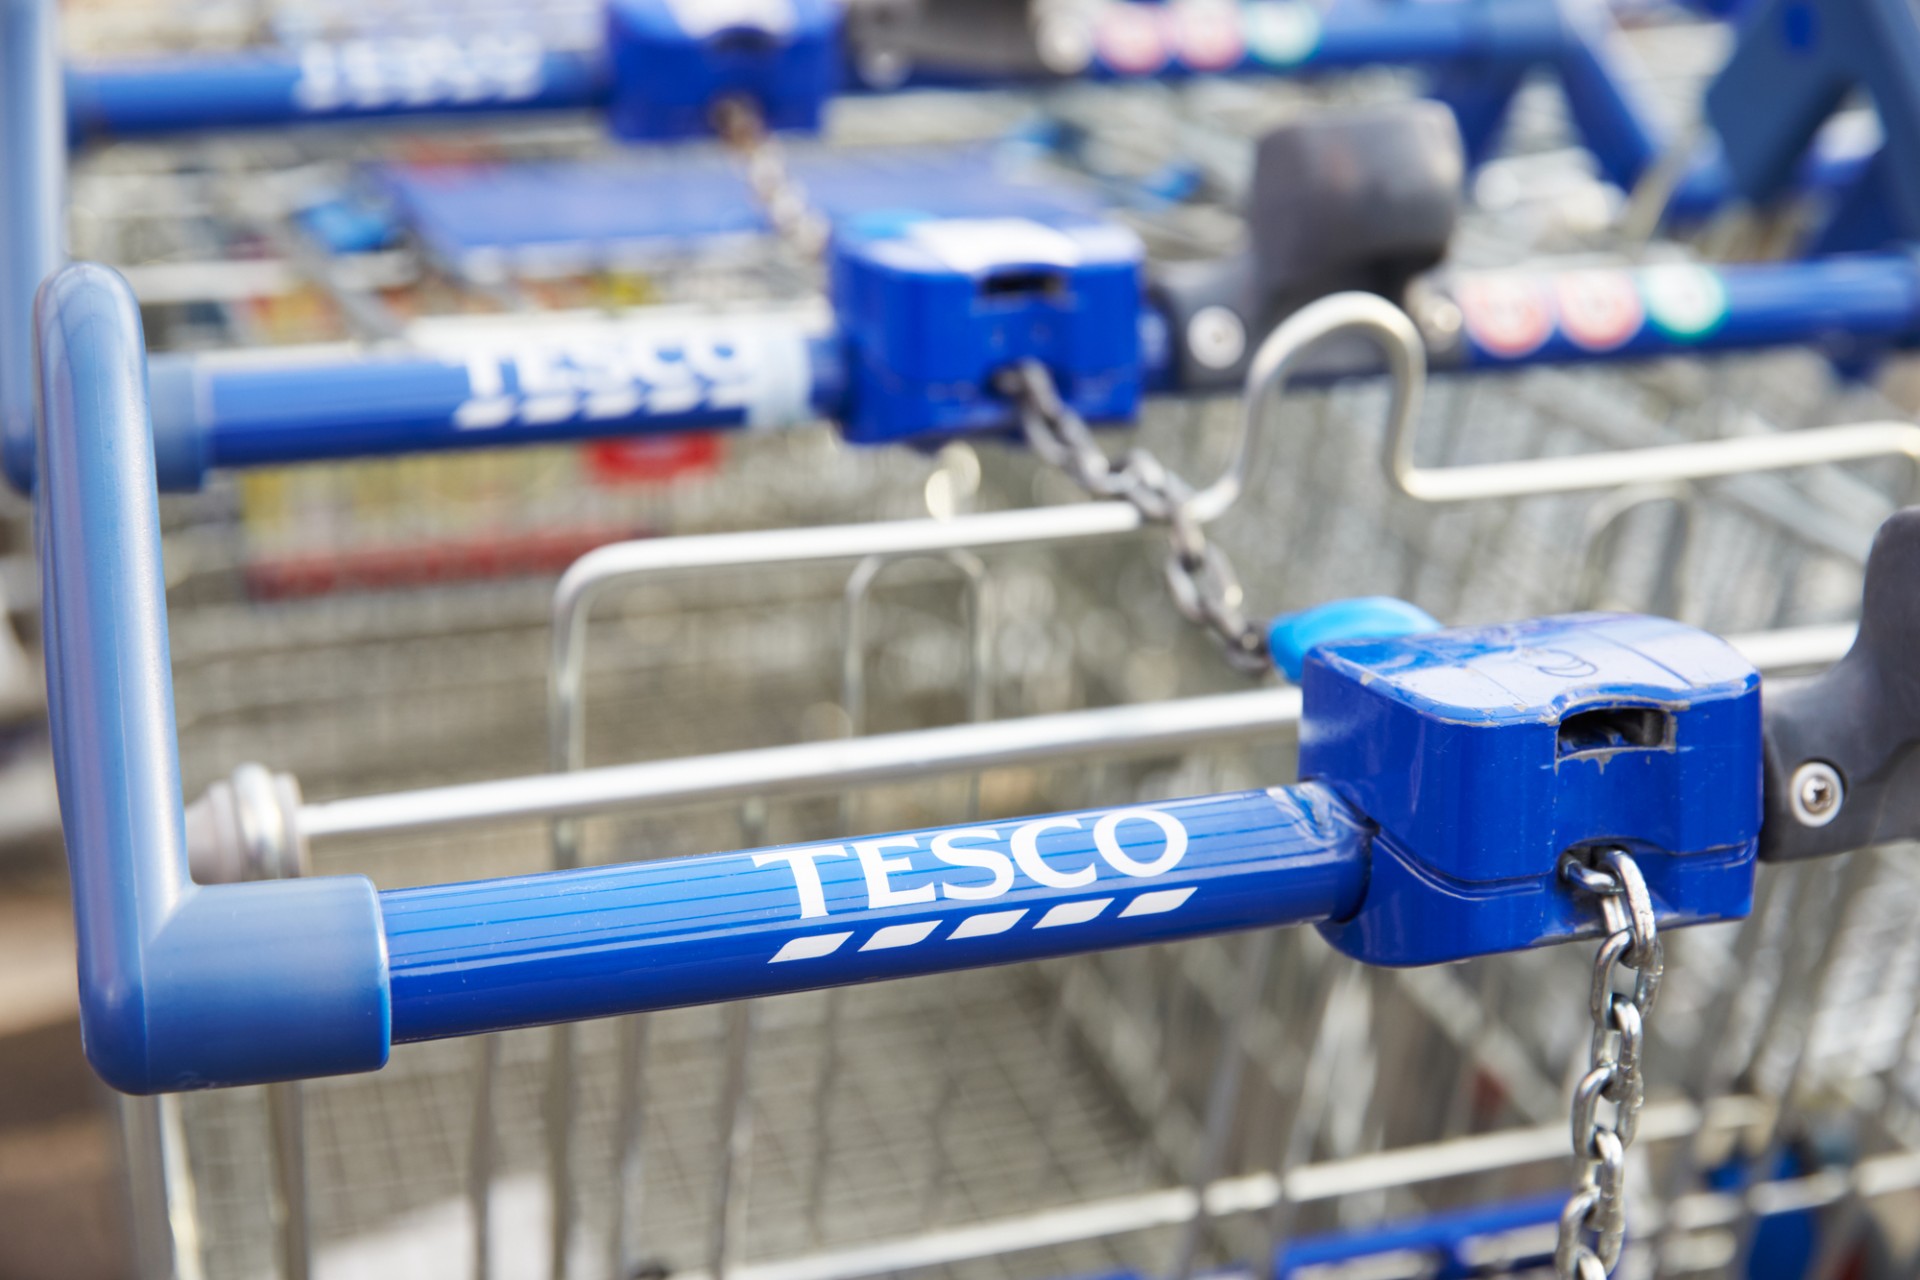 Tesco Embraces the Experiential Marketing Trend